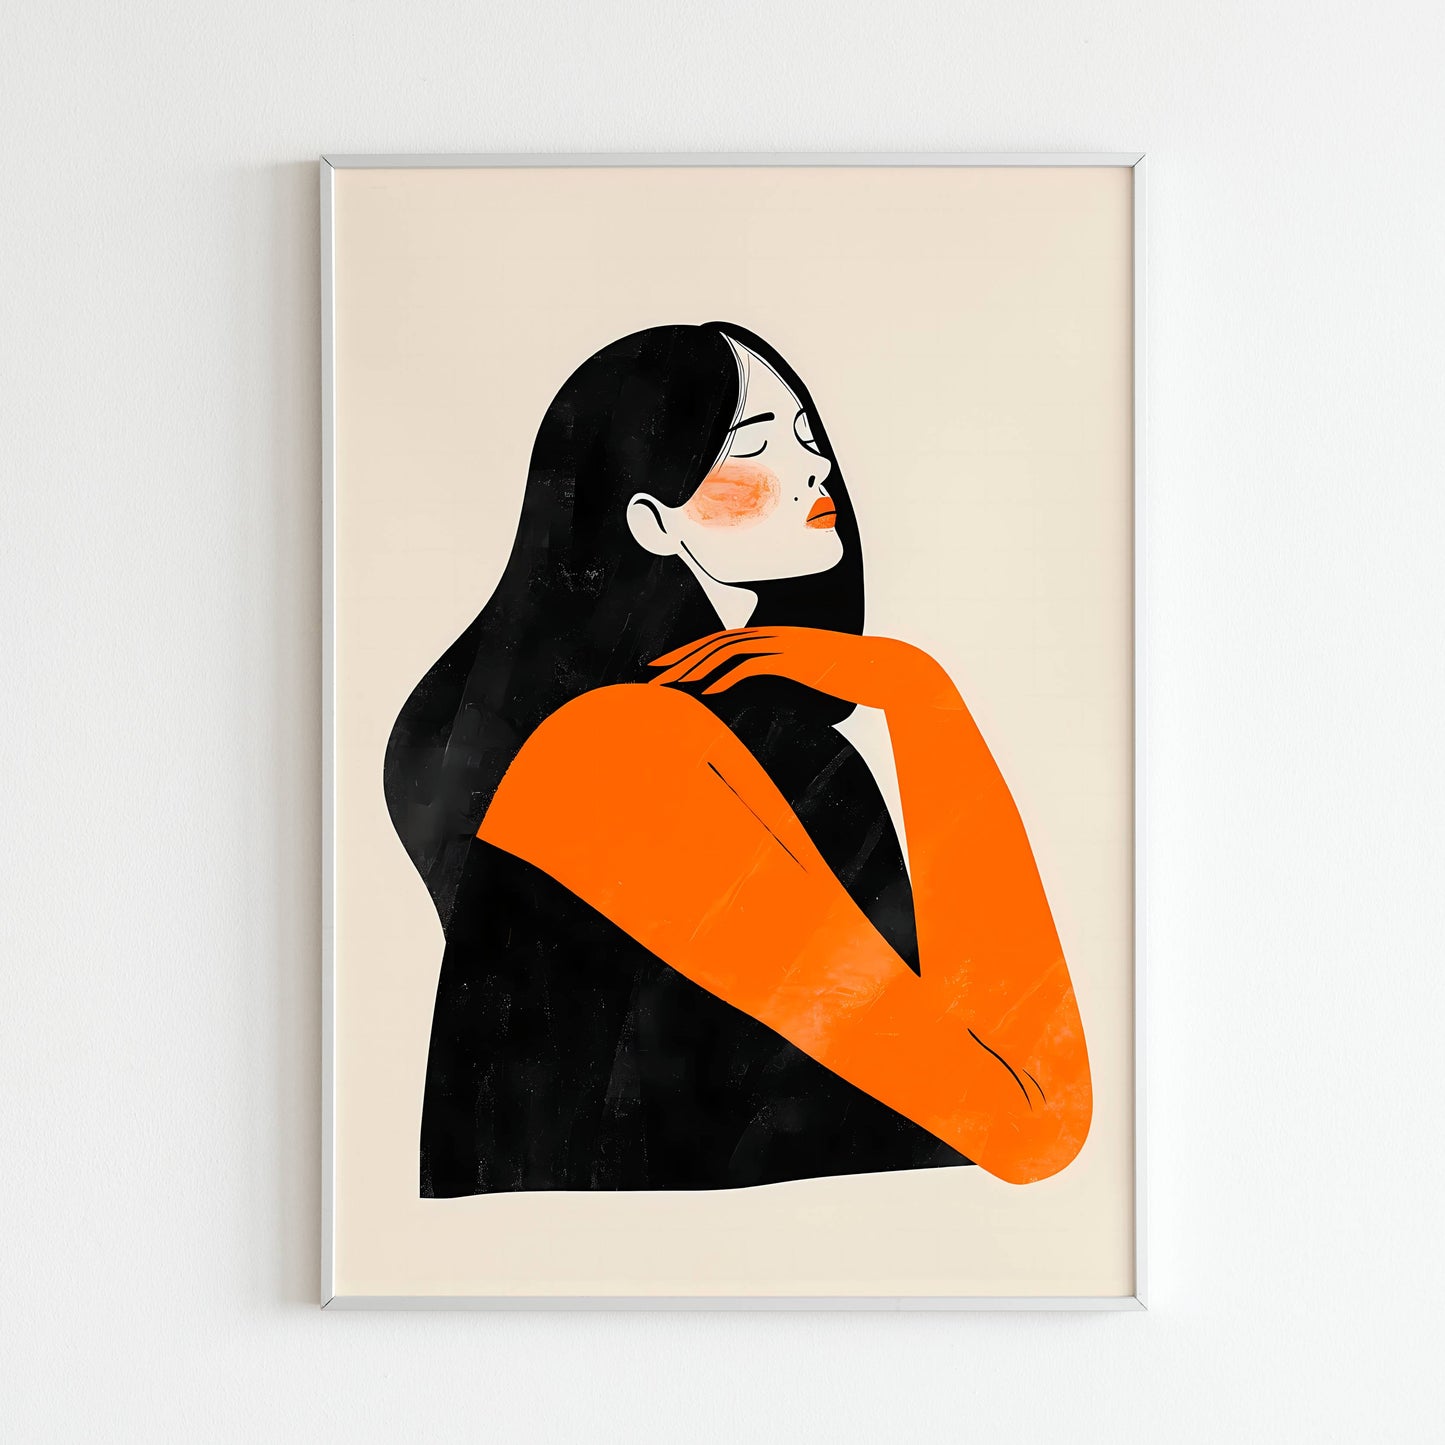 Abstract Woman - Printed Wall Art / Poster. This unique and abstract poster depicts a woman in a modern style. Arrives ready to hang.